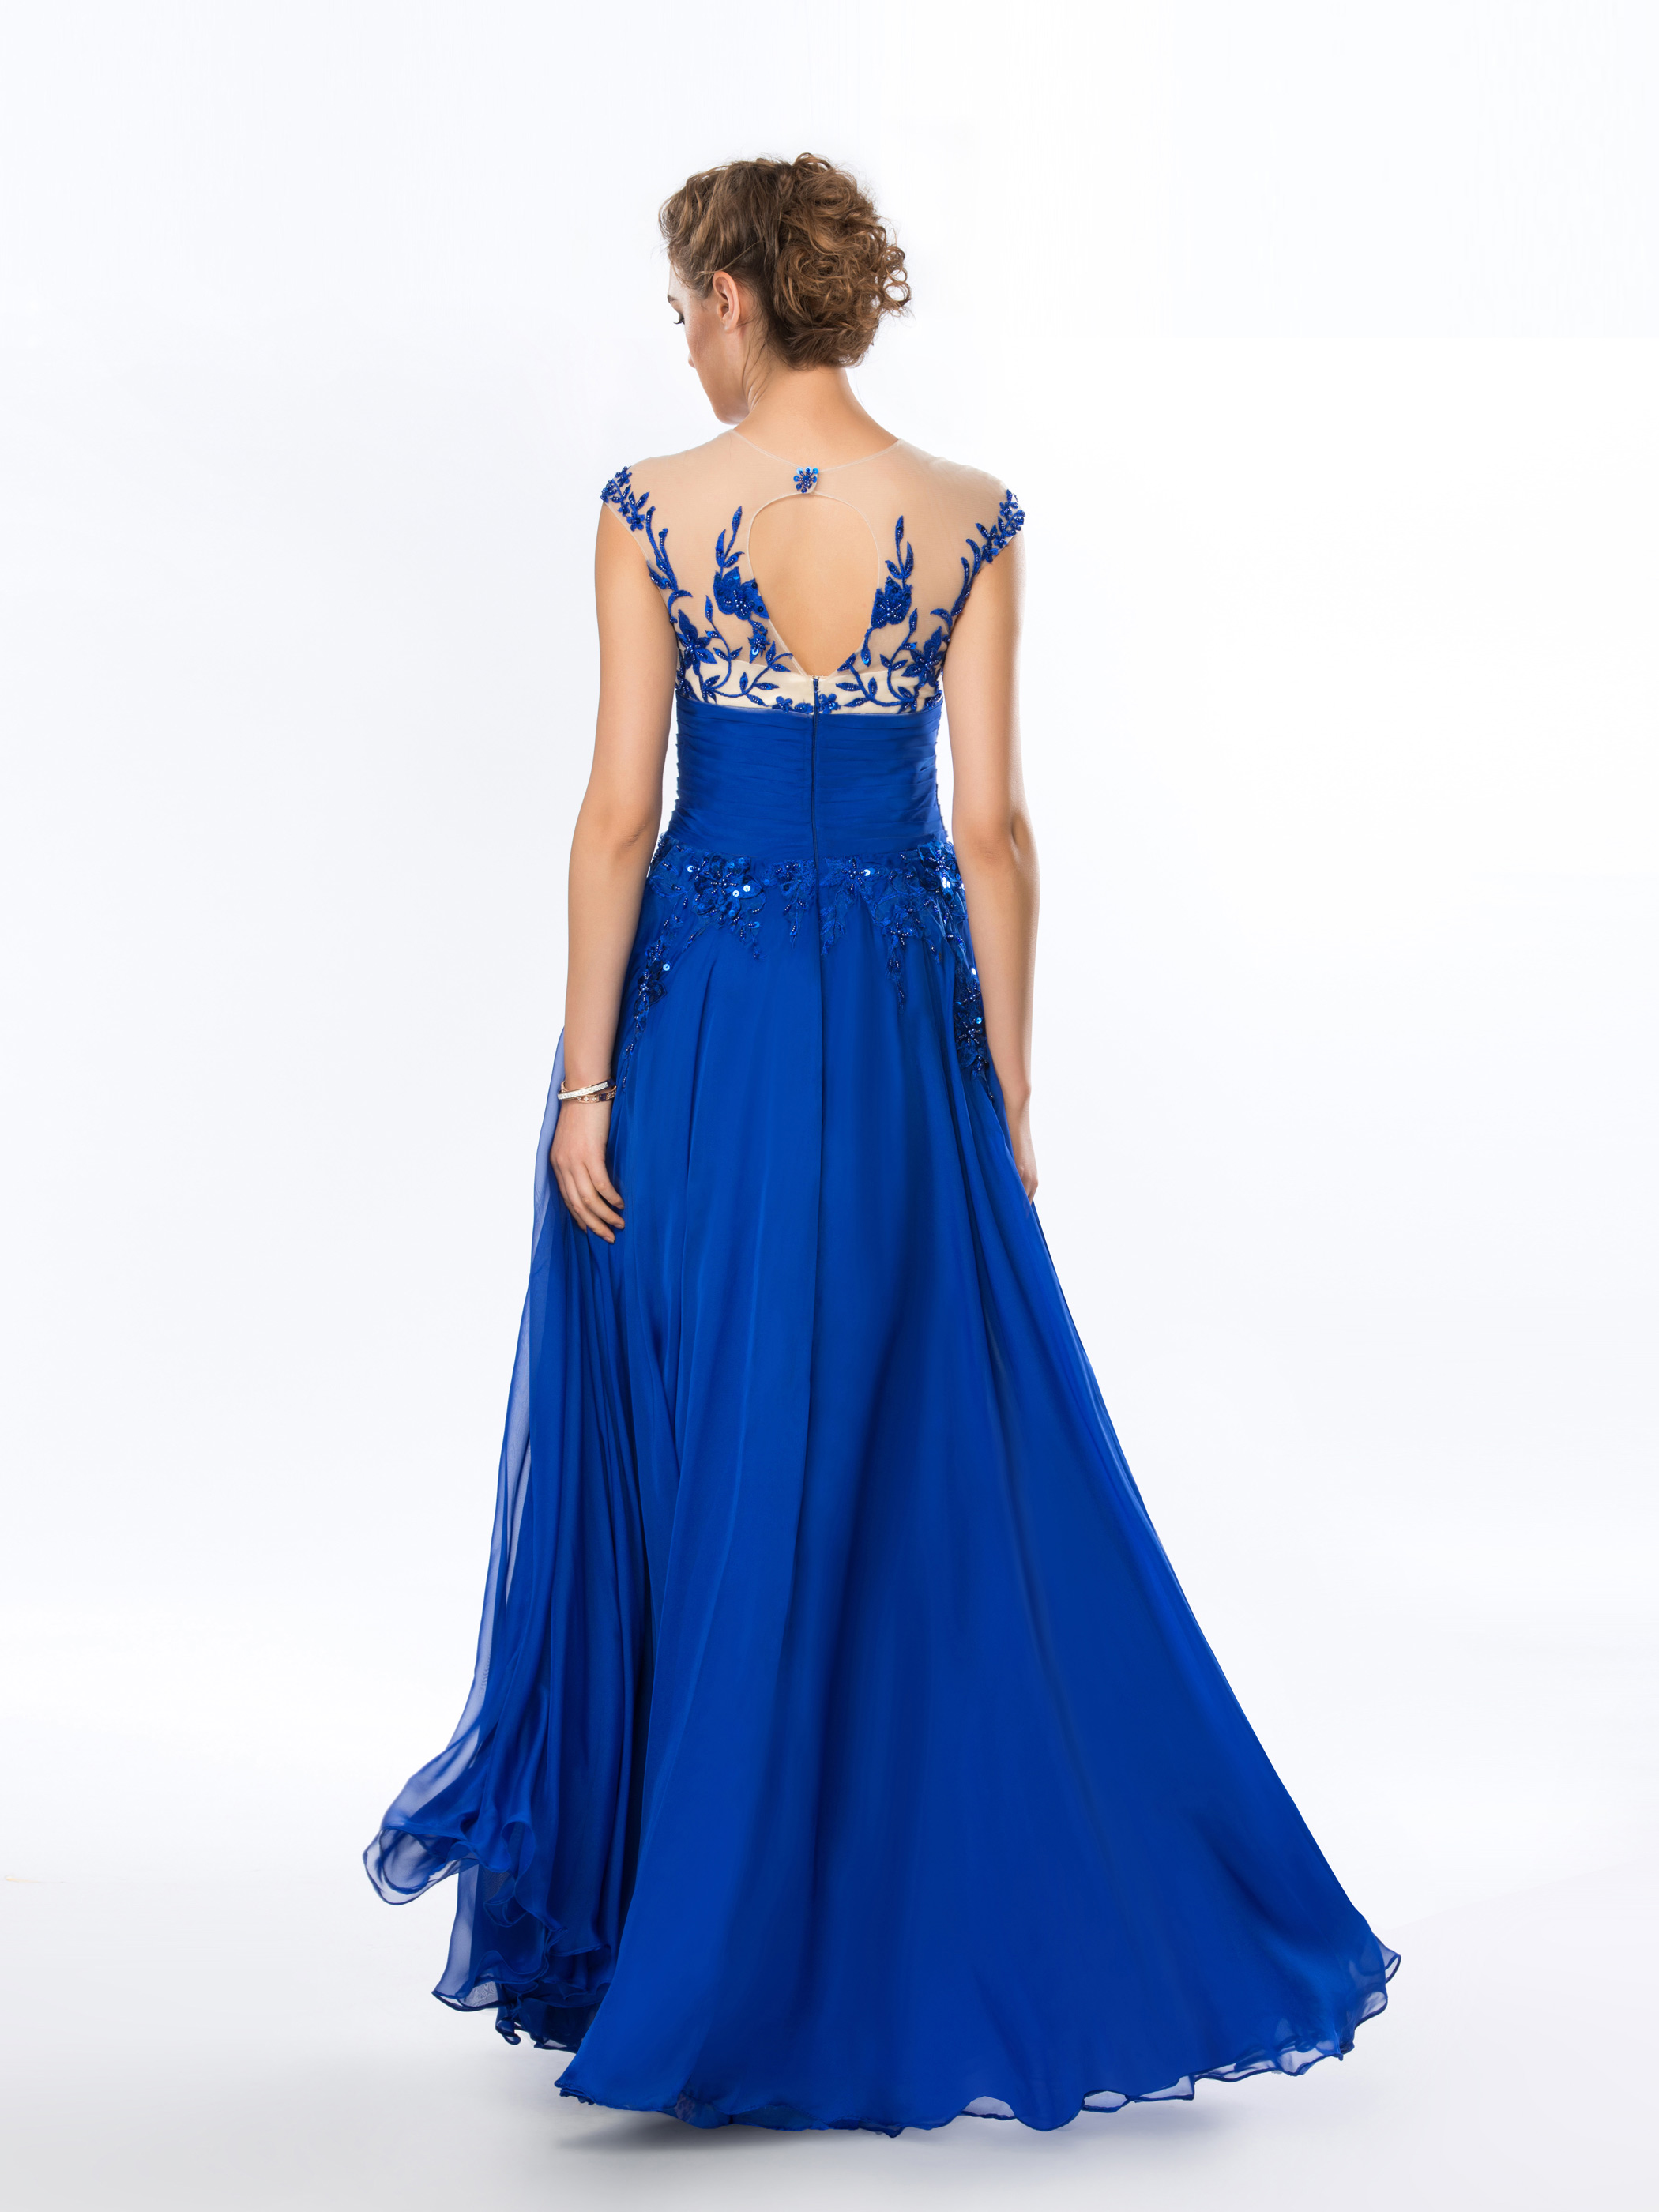 Charming A-line Appliques Floor-Length with Belt Evening/Prom Dress